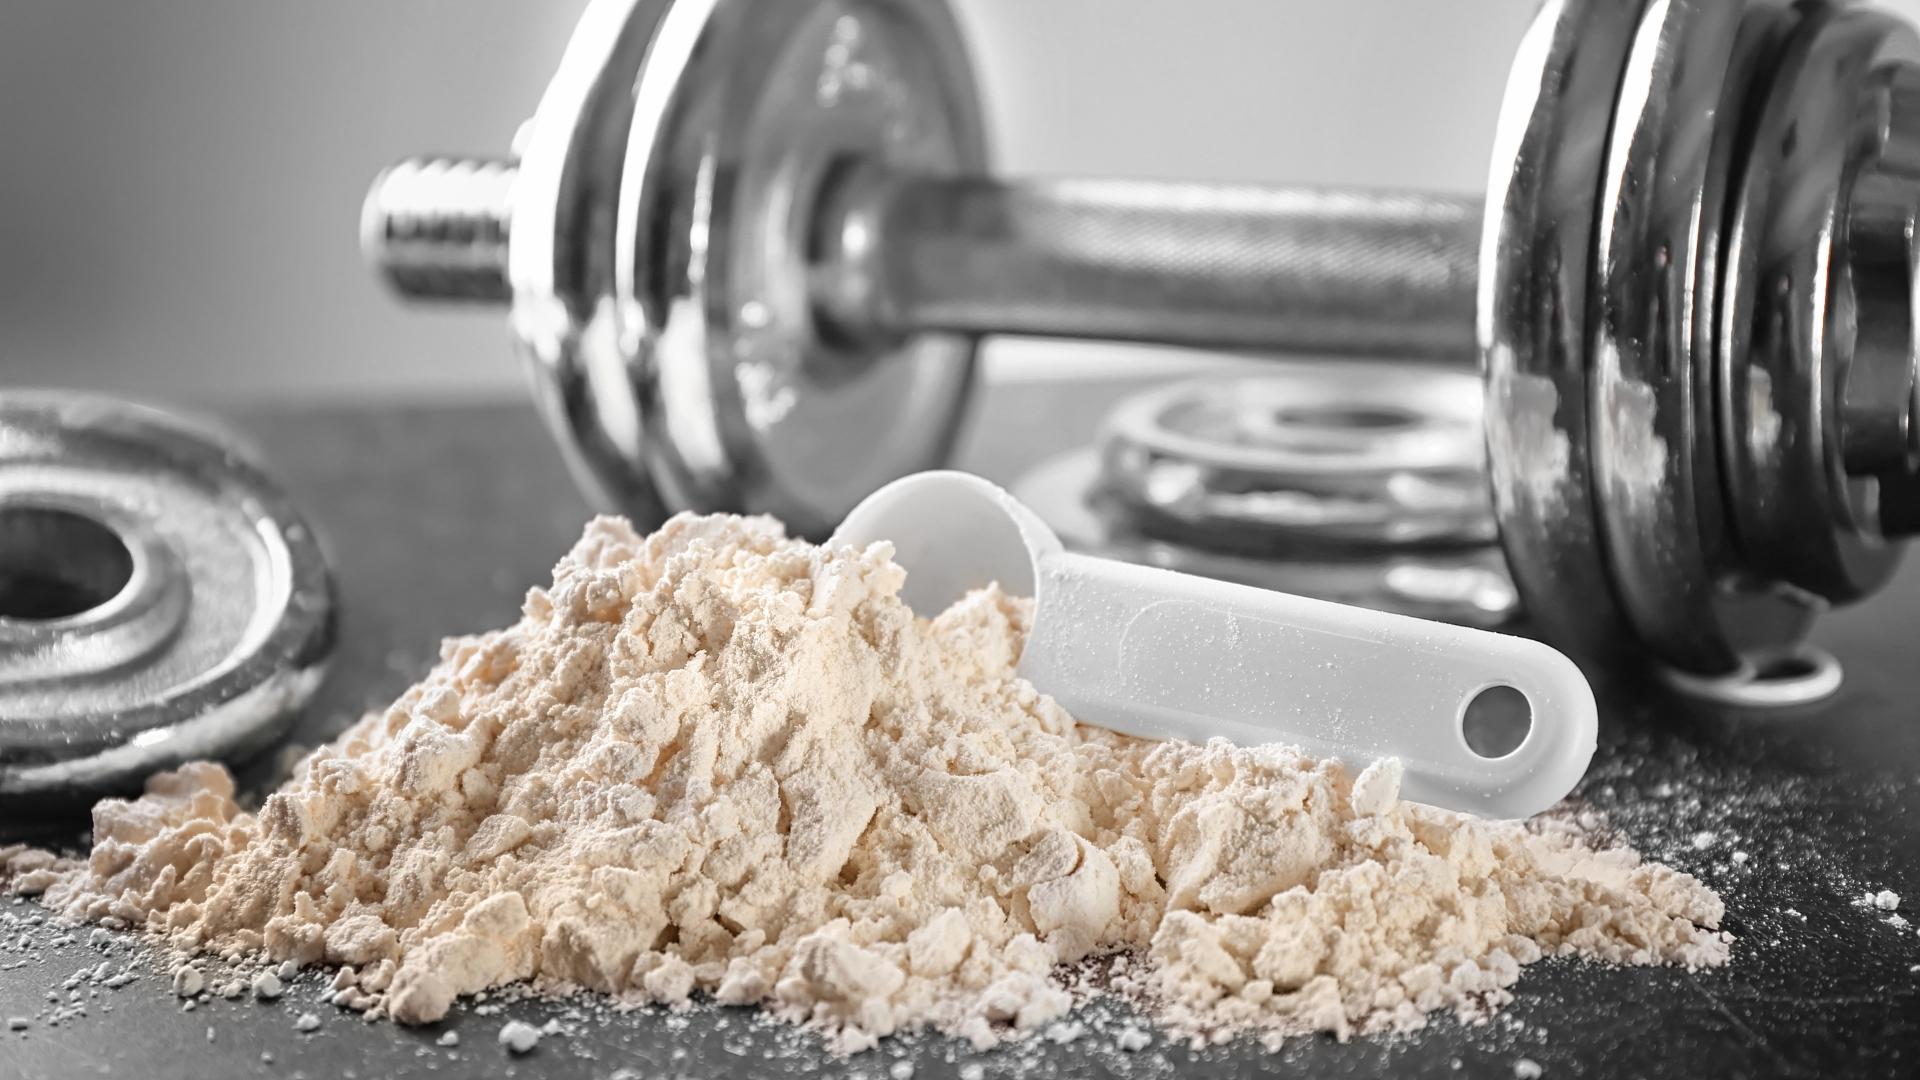 pre-workout ingredients increase strength - featured image